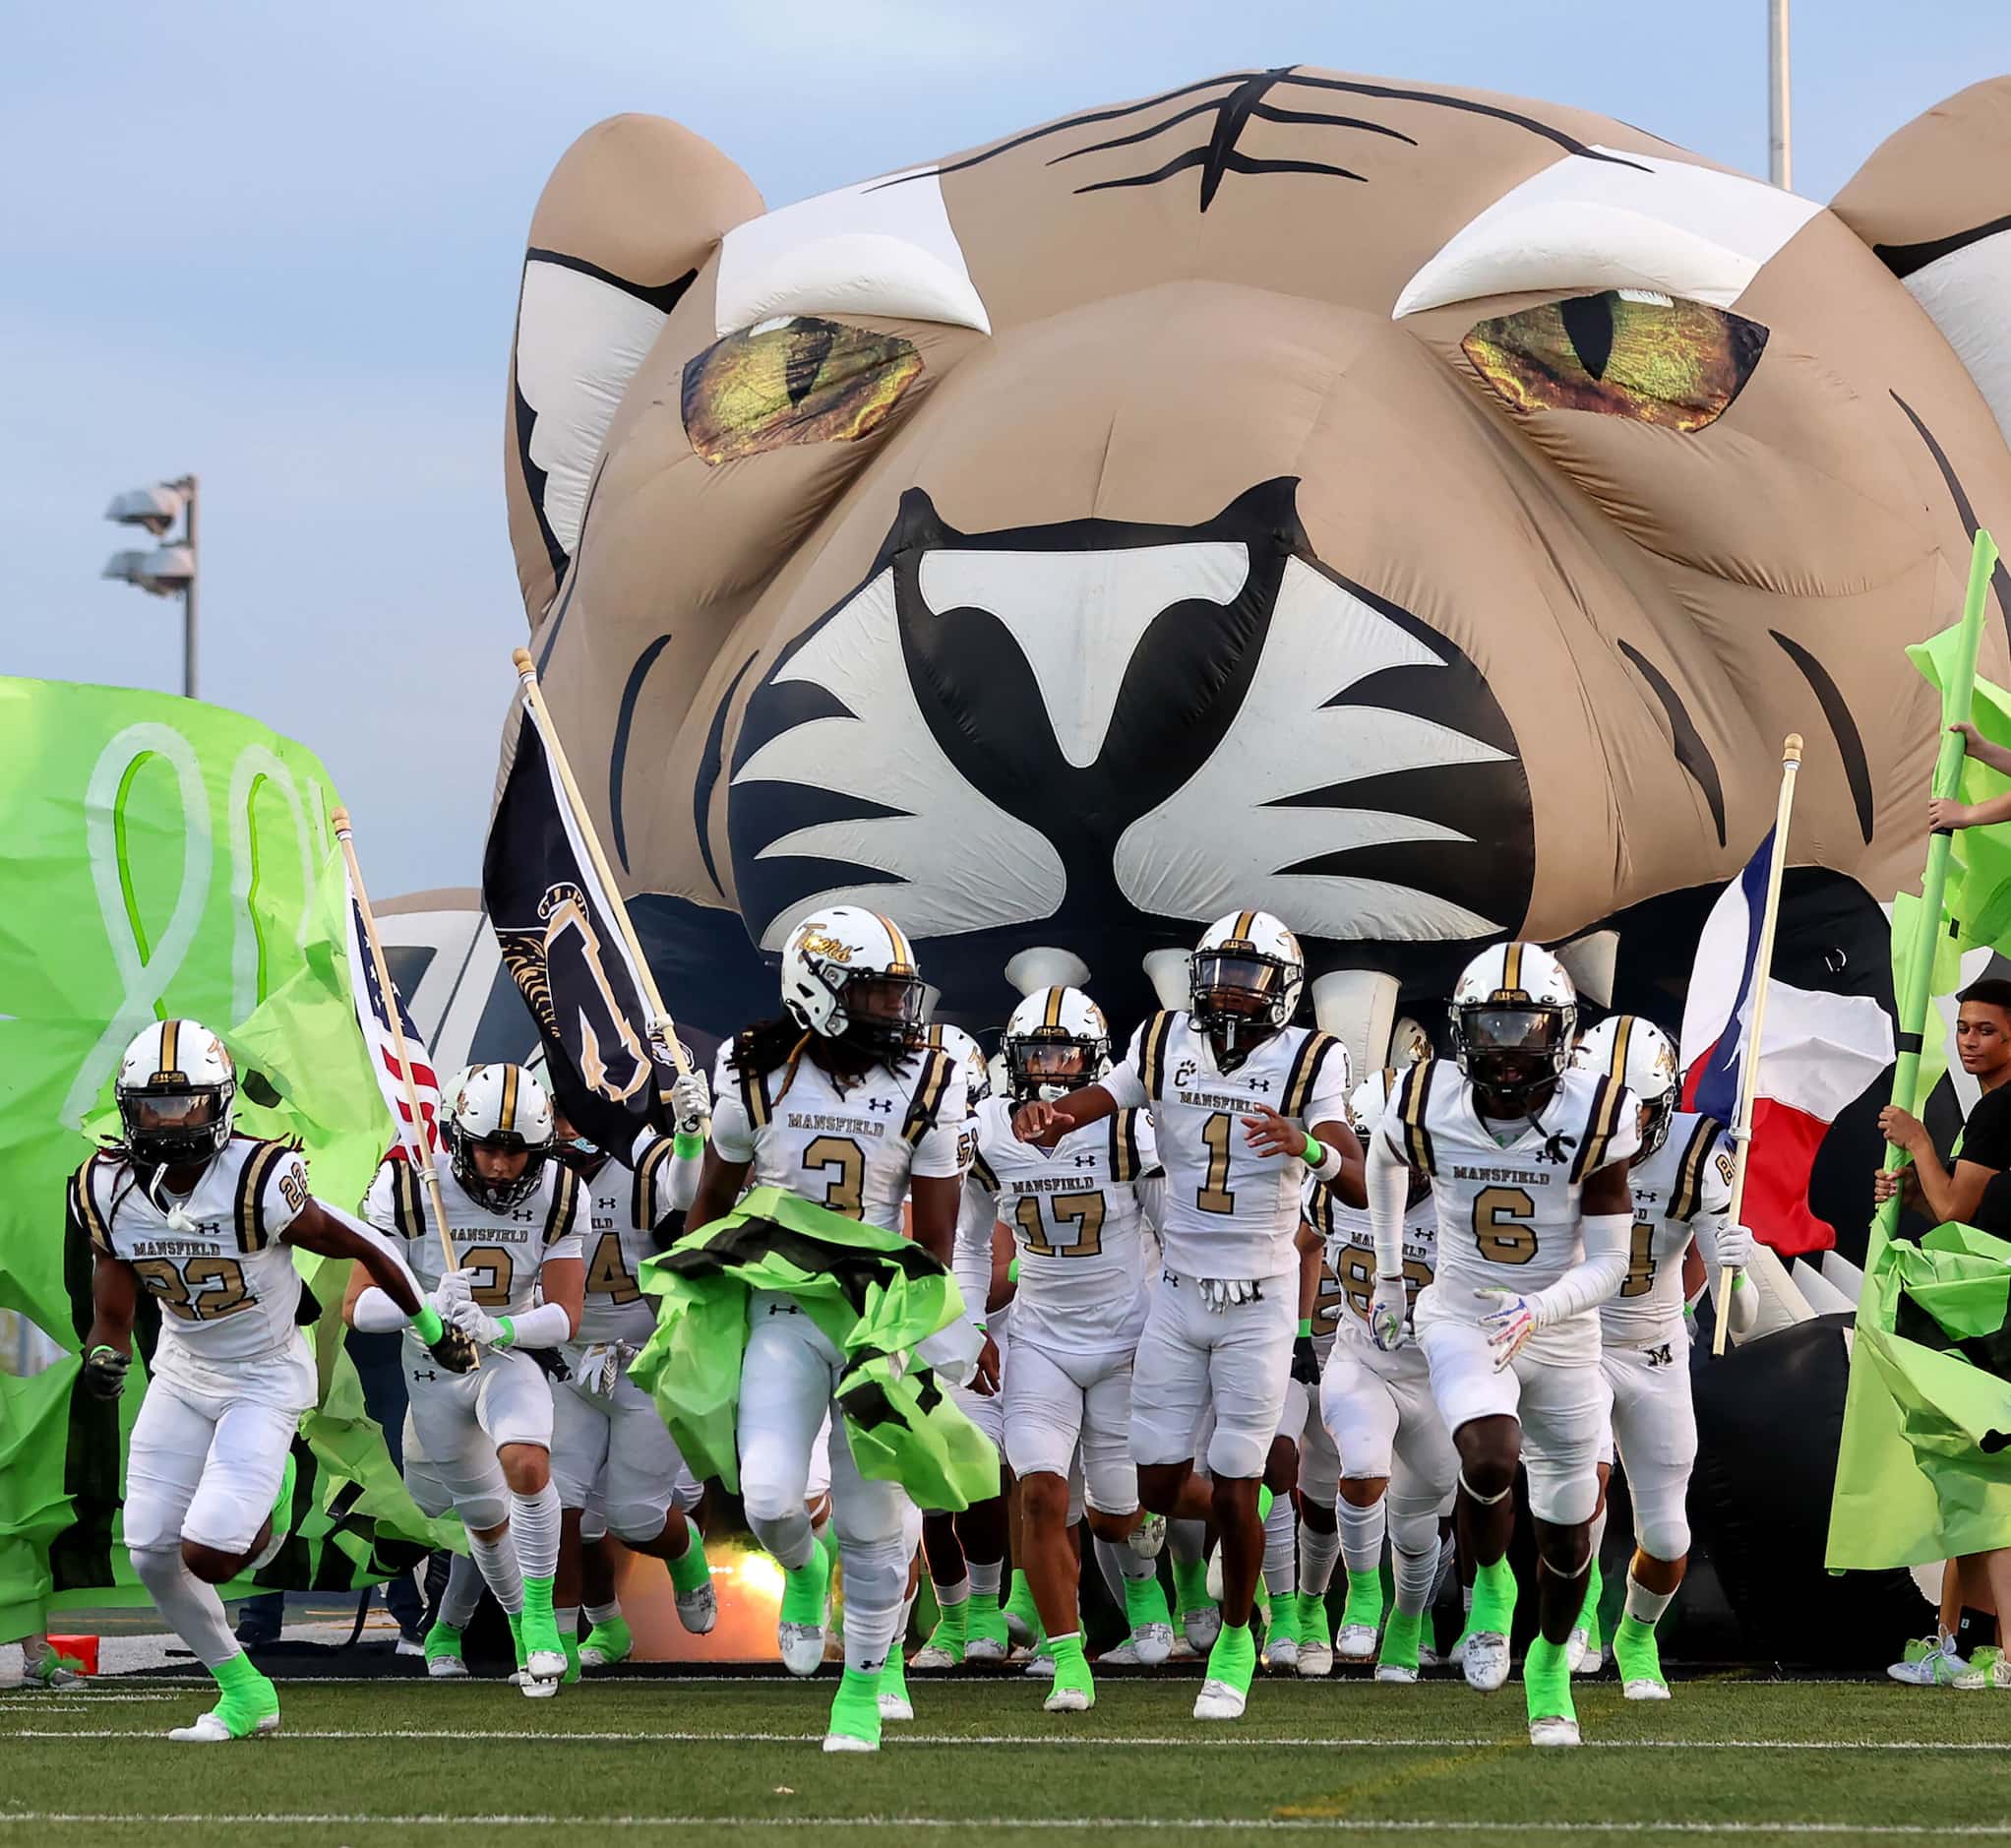 The Mansfield Tigers enter the field to face Cedar Hill in a District 11-6A high school...